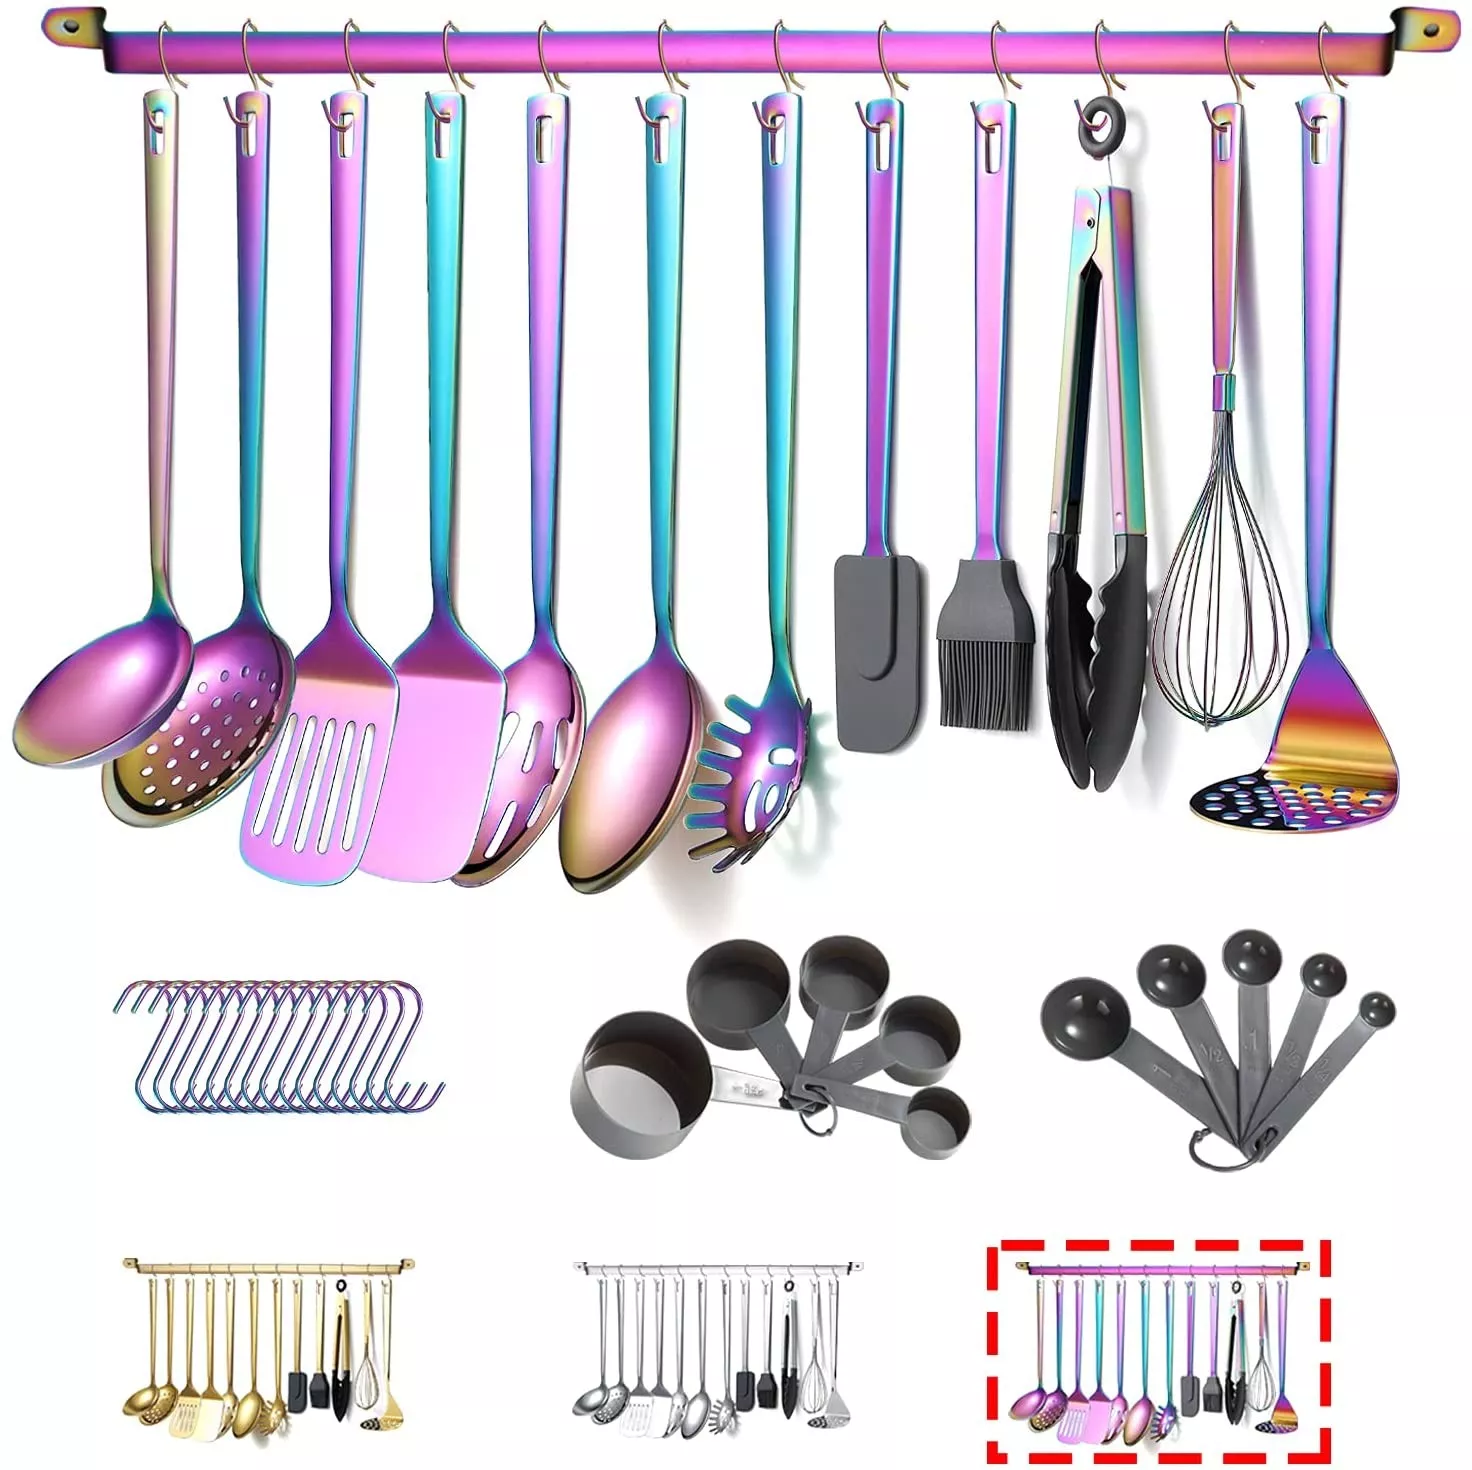 Gold Cooking Utensils Set, Berglander Stainless Steel 13 Pieces Kitchen Utensils  Set With Titanium Gold Plating, Kitchen Tools Set With Utensil Holder, Dishwasher  Safe, Easy to Clean – Built to Order, Made